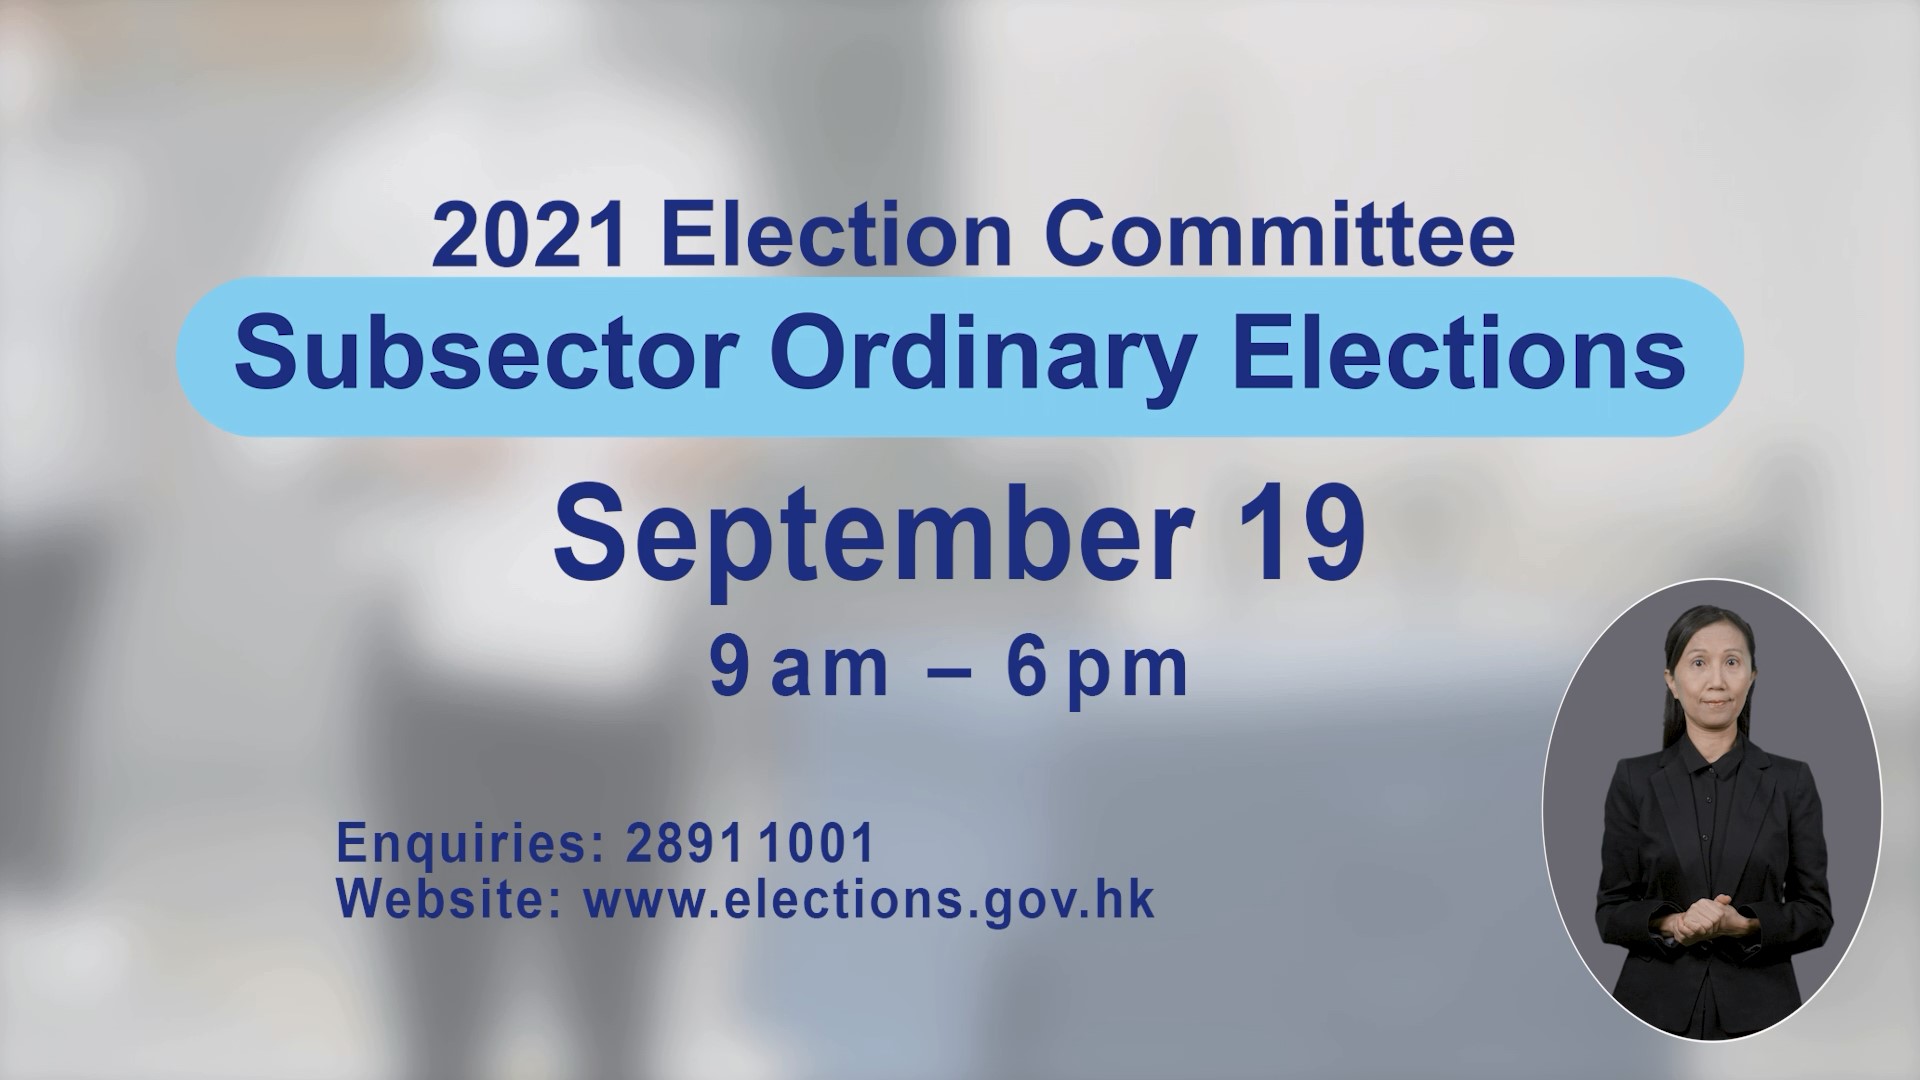 2021 Election Committee Subsector Ordinary Elections (Video on Polling Procedures)